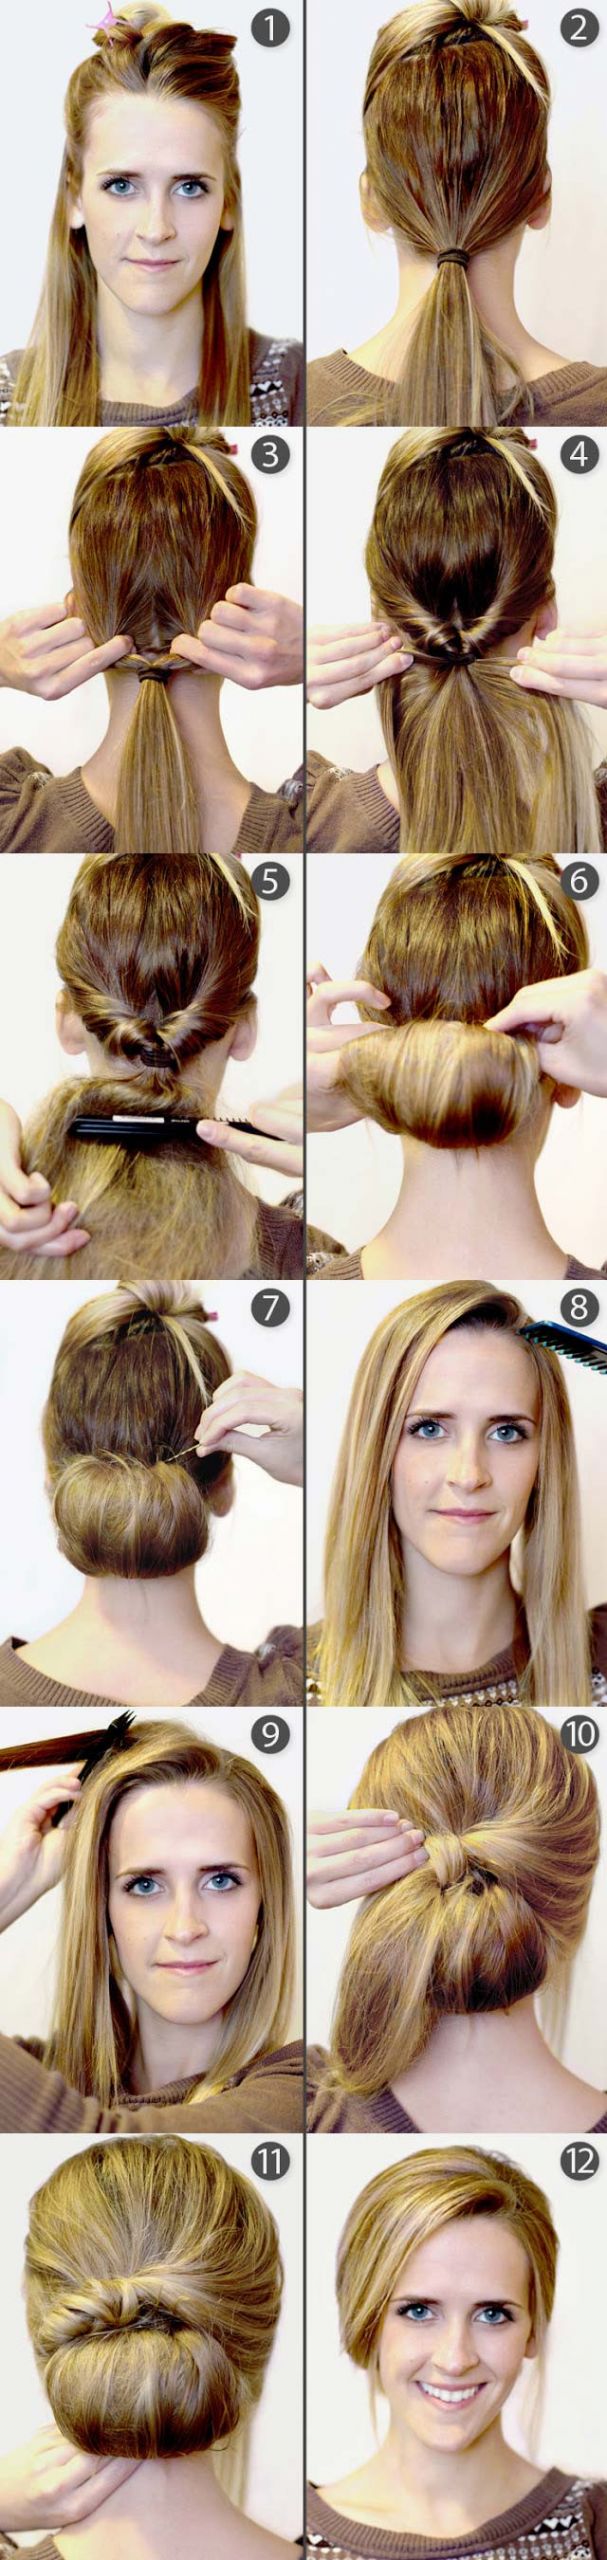 DIY Womens Haircuts
 9 Pretty DIY Hairstyles With Step by Step Tutorials